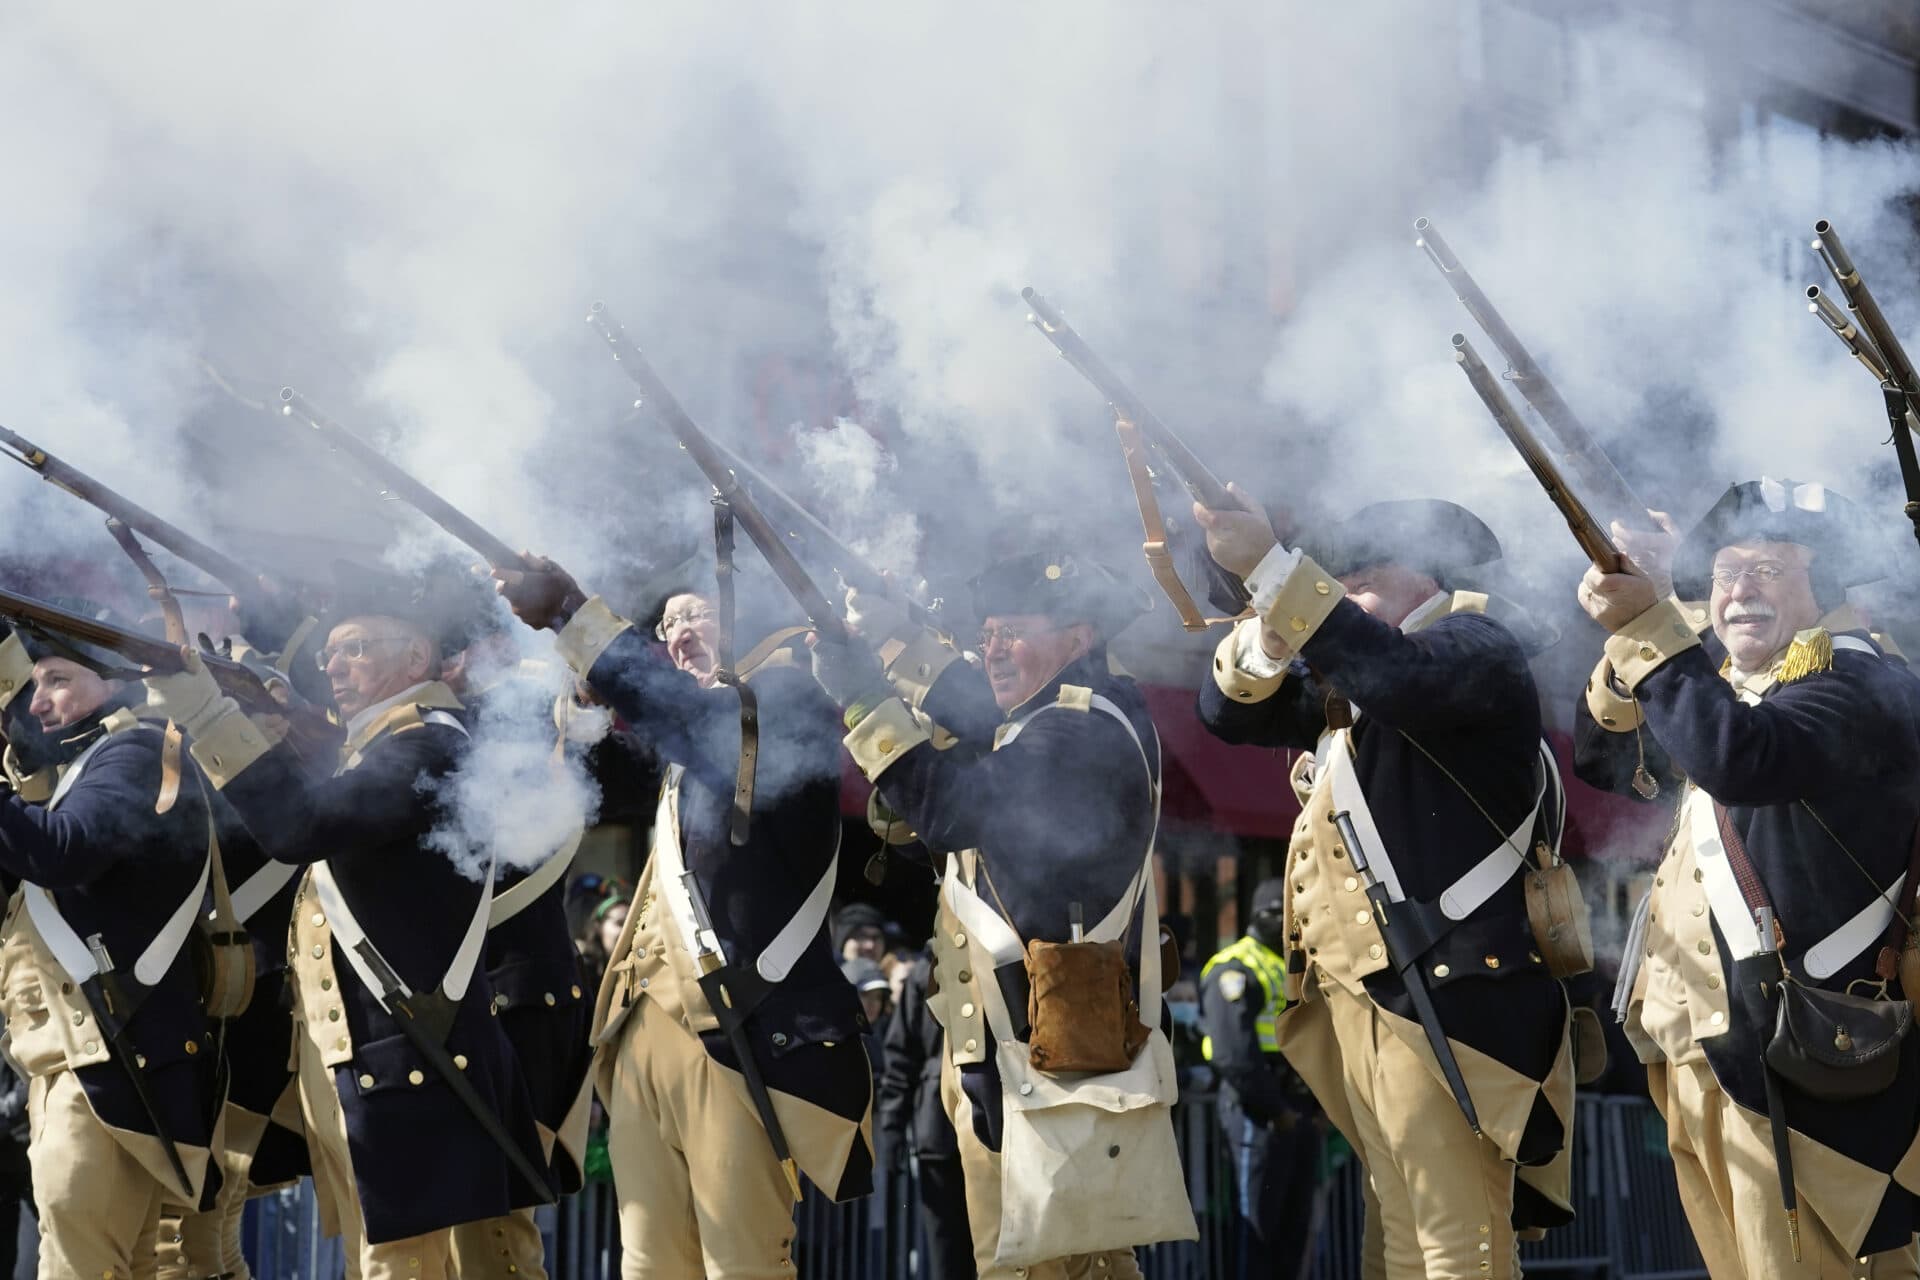 Re-enactors portraying members of the American forces during the Revolutionary War fire their muskets during the annual St. Patrick's Day parade. (Steven Senne/AP)